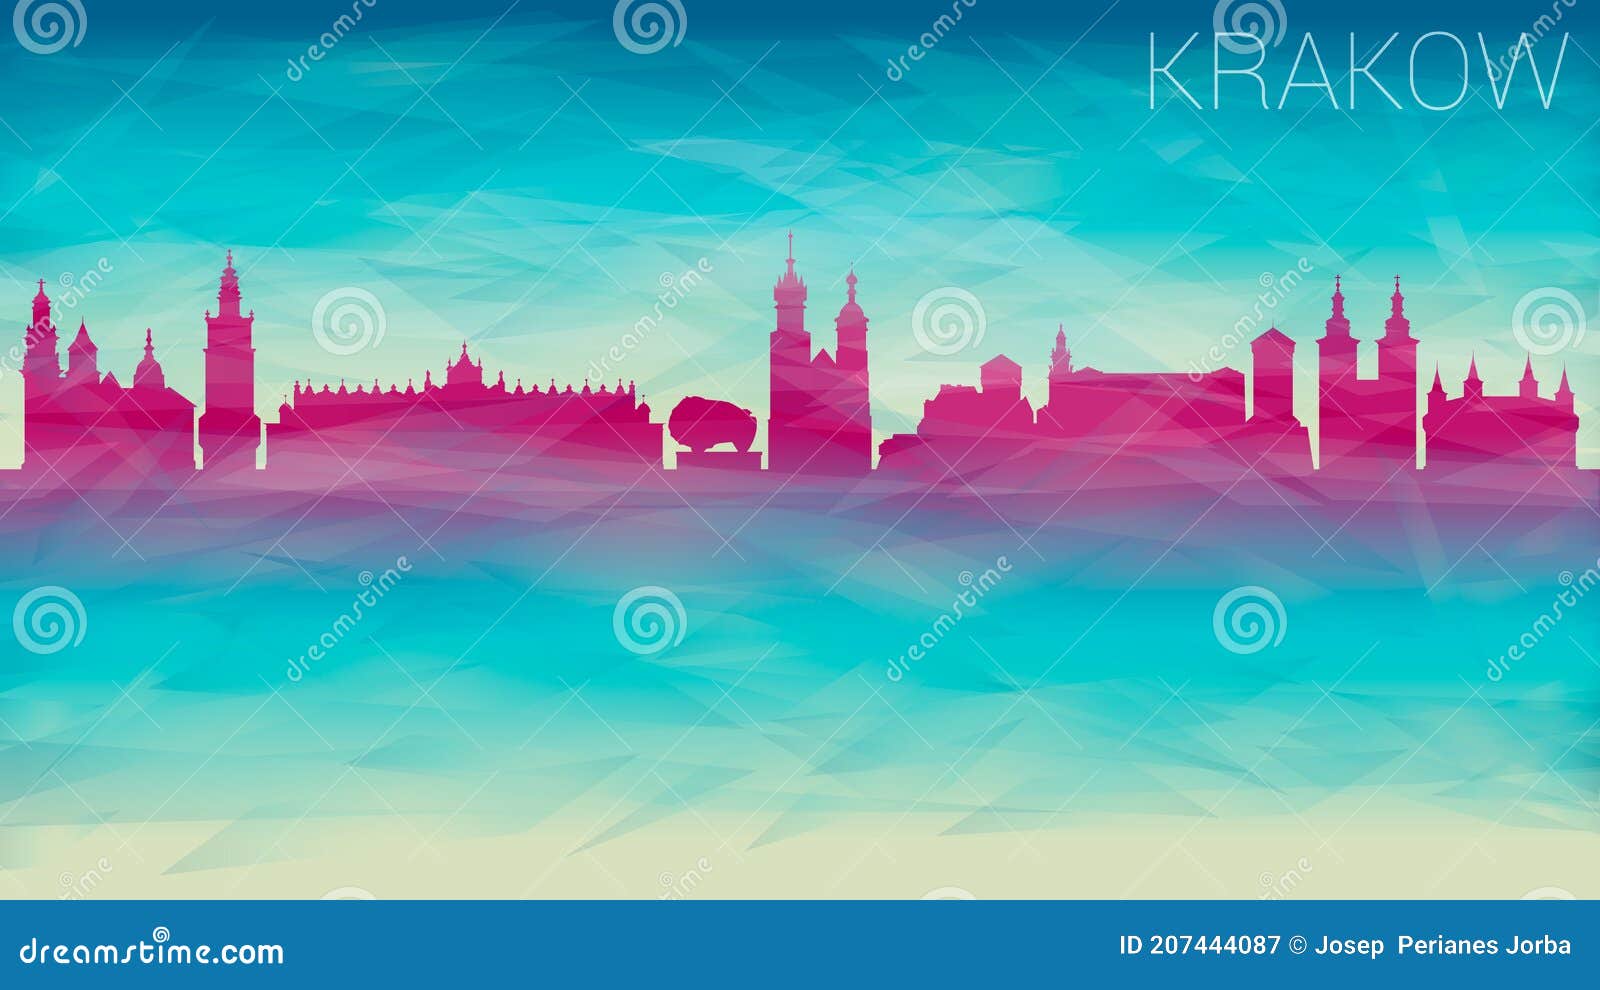 krakow polonia city skyline  silhouette. broken glass abstract  textured. banner background colorful  composition.